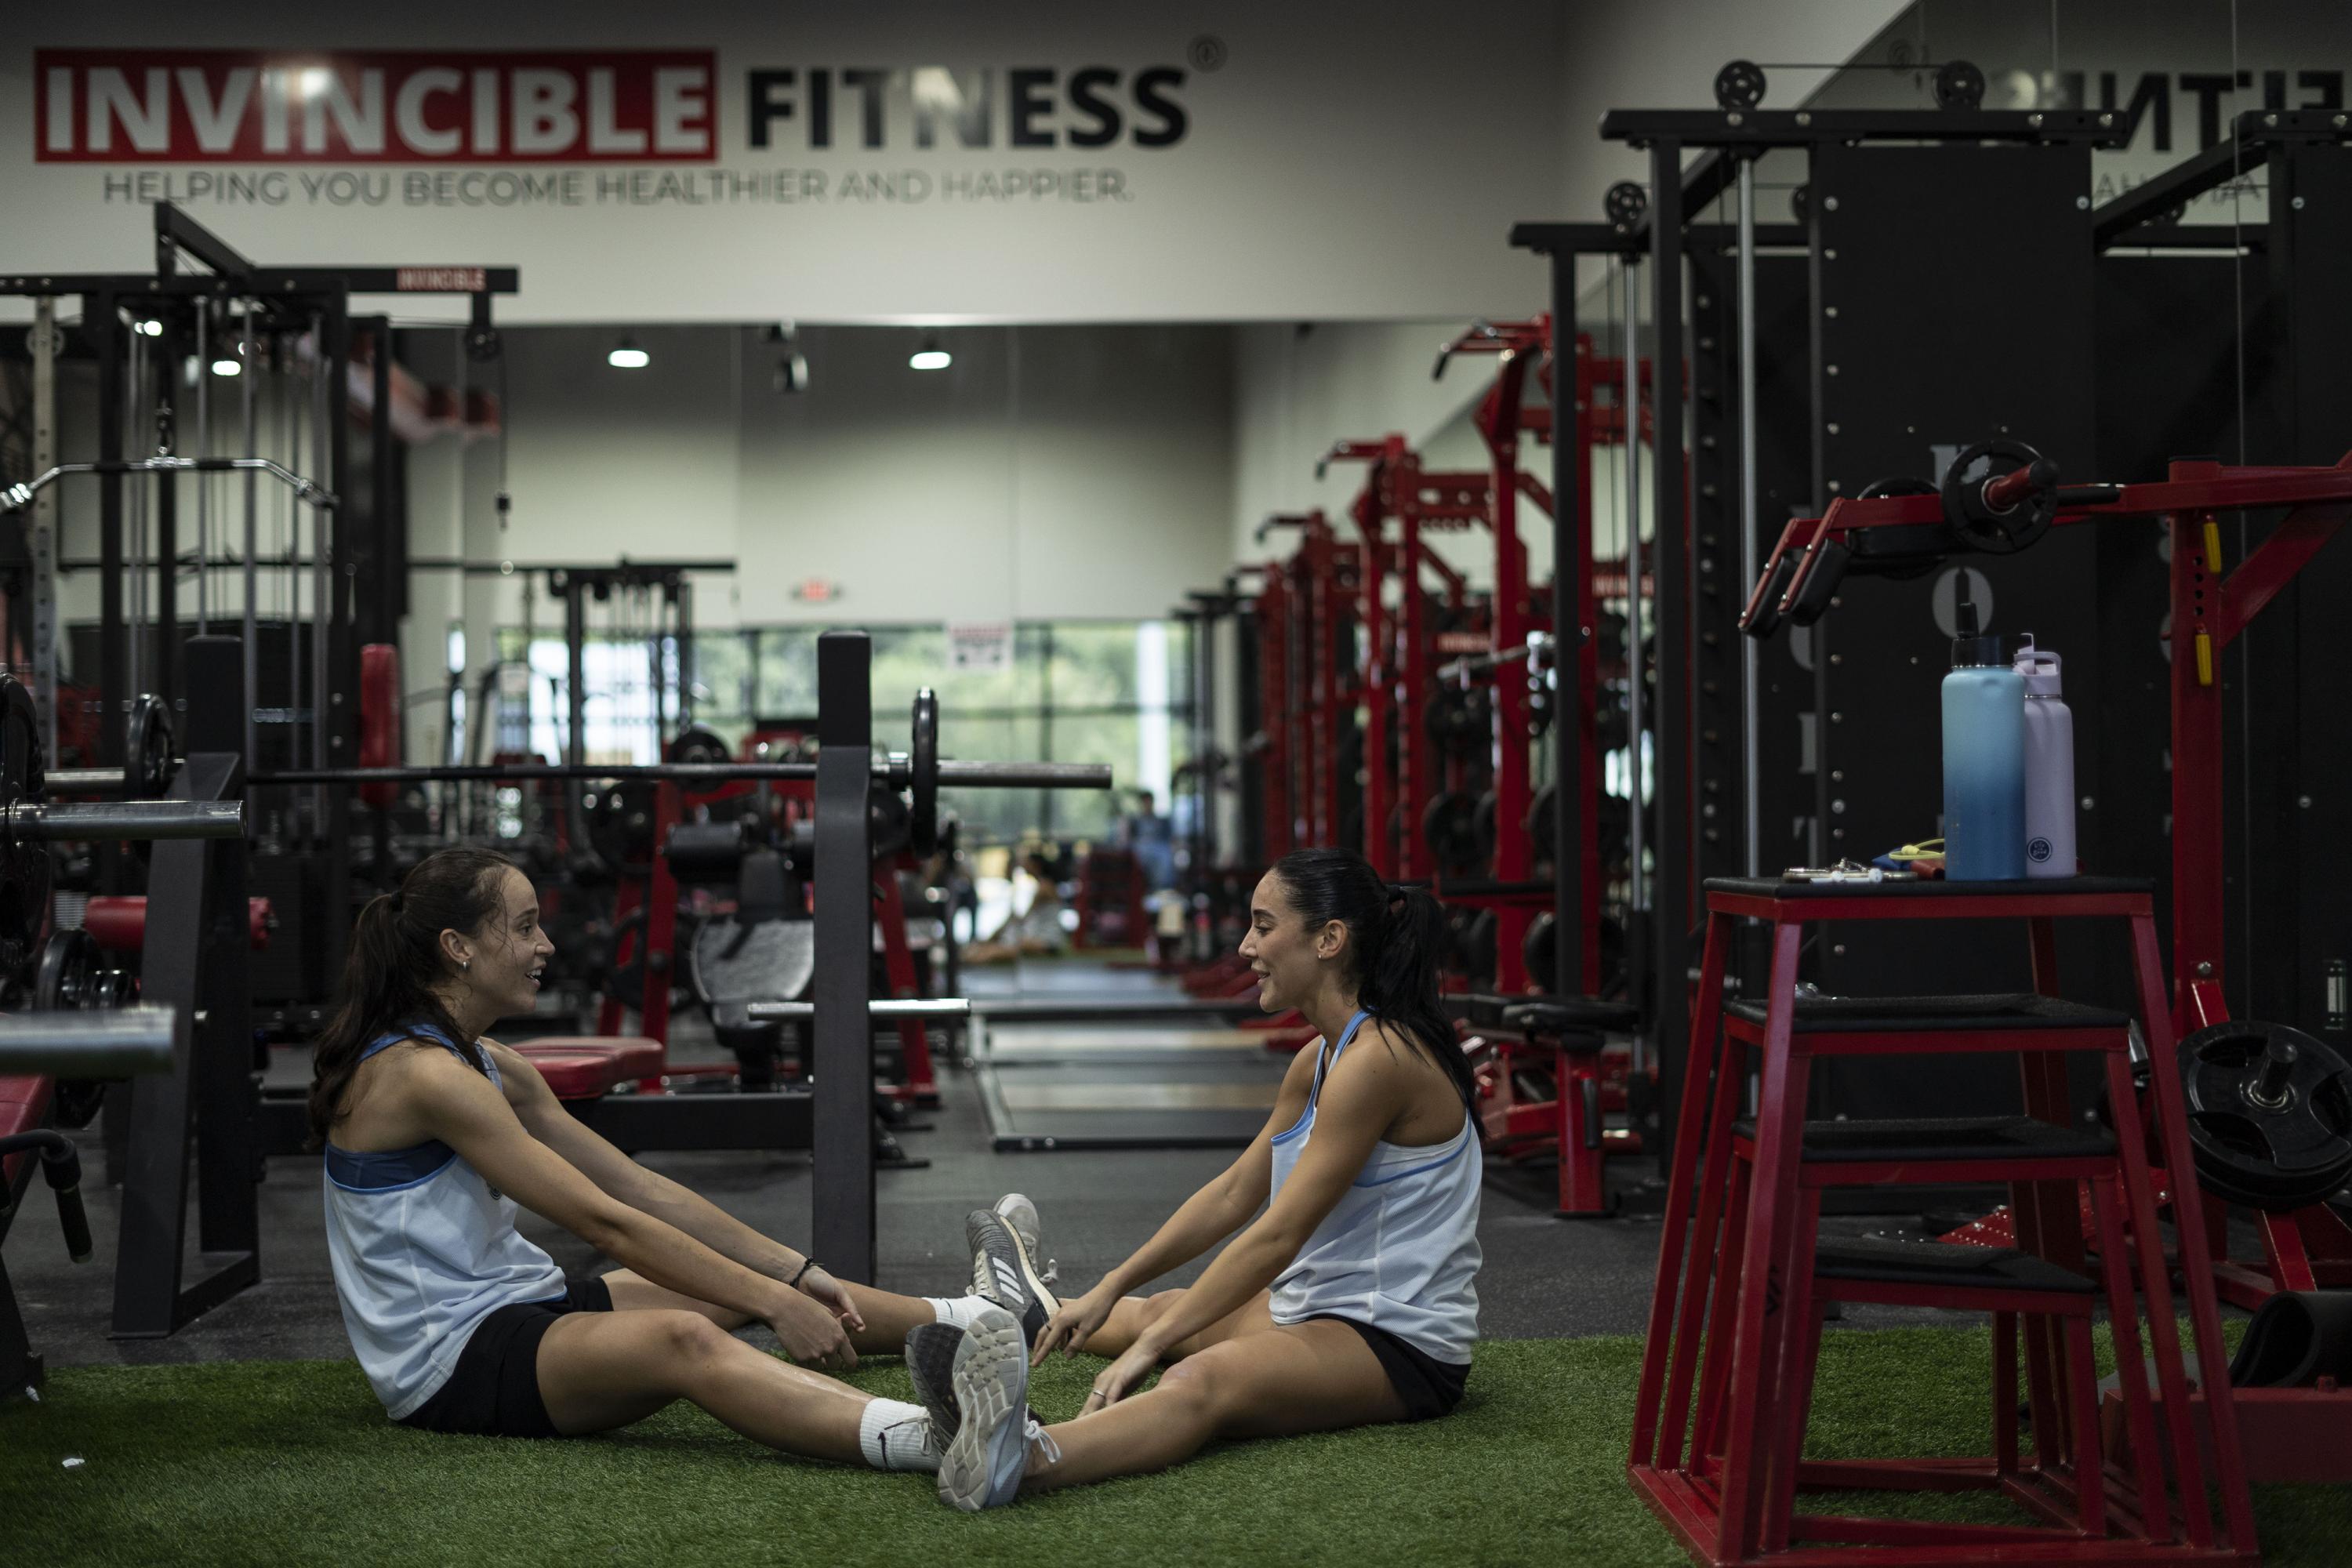 Reina Cruz and Megan Bennett train daily in a gym near their home in Spring, Texas. They also train for soccer after work with a personal trainer.